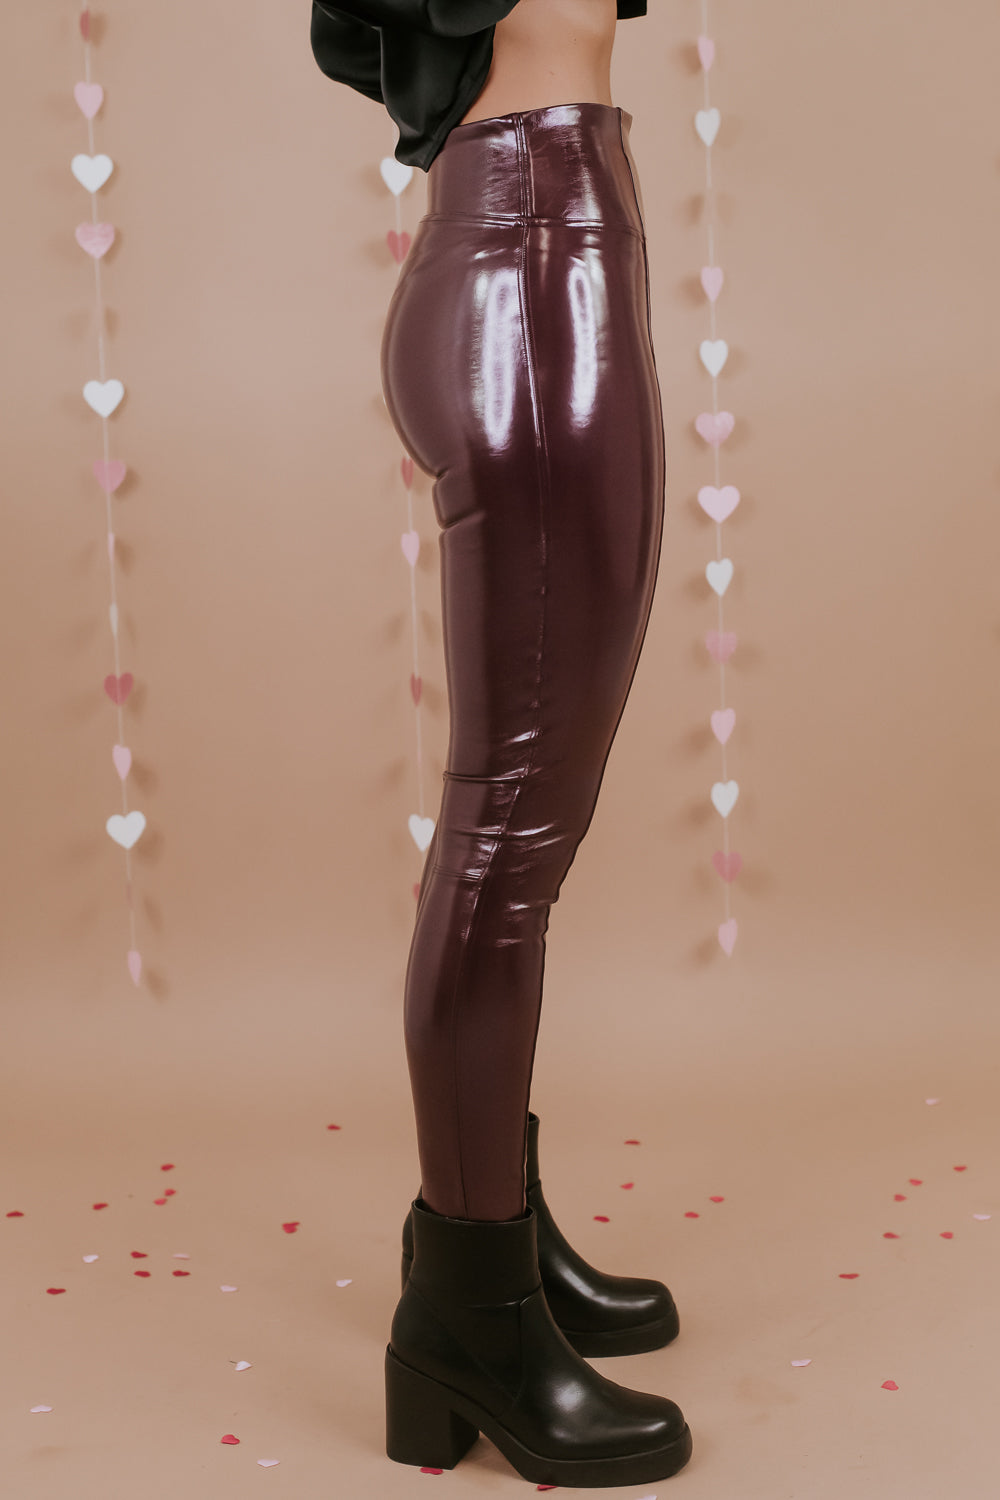 Spanx Faux Patent Leather Leggings - Size Medium – Chic Boutique  Consignments